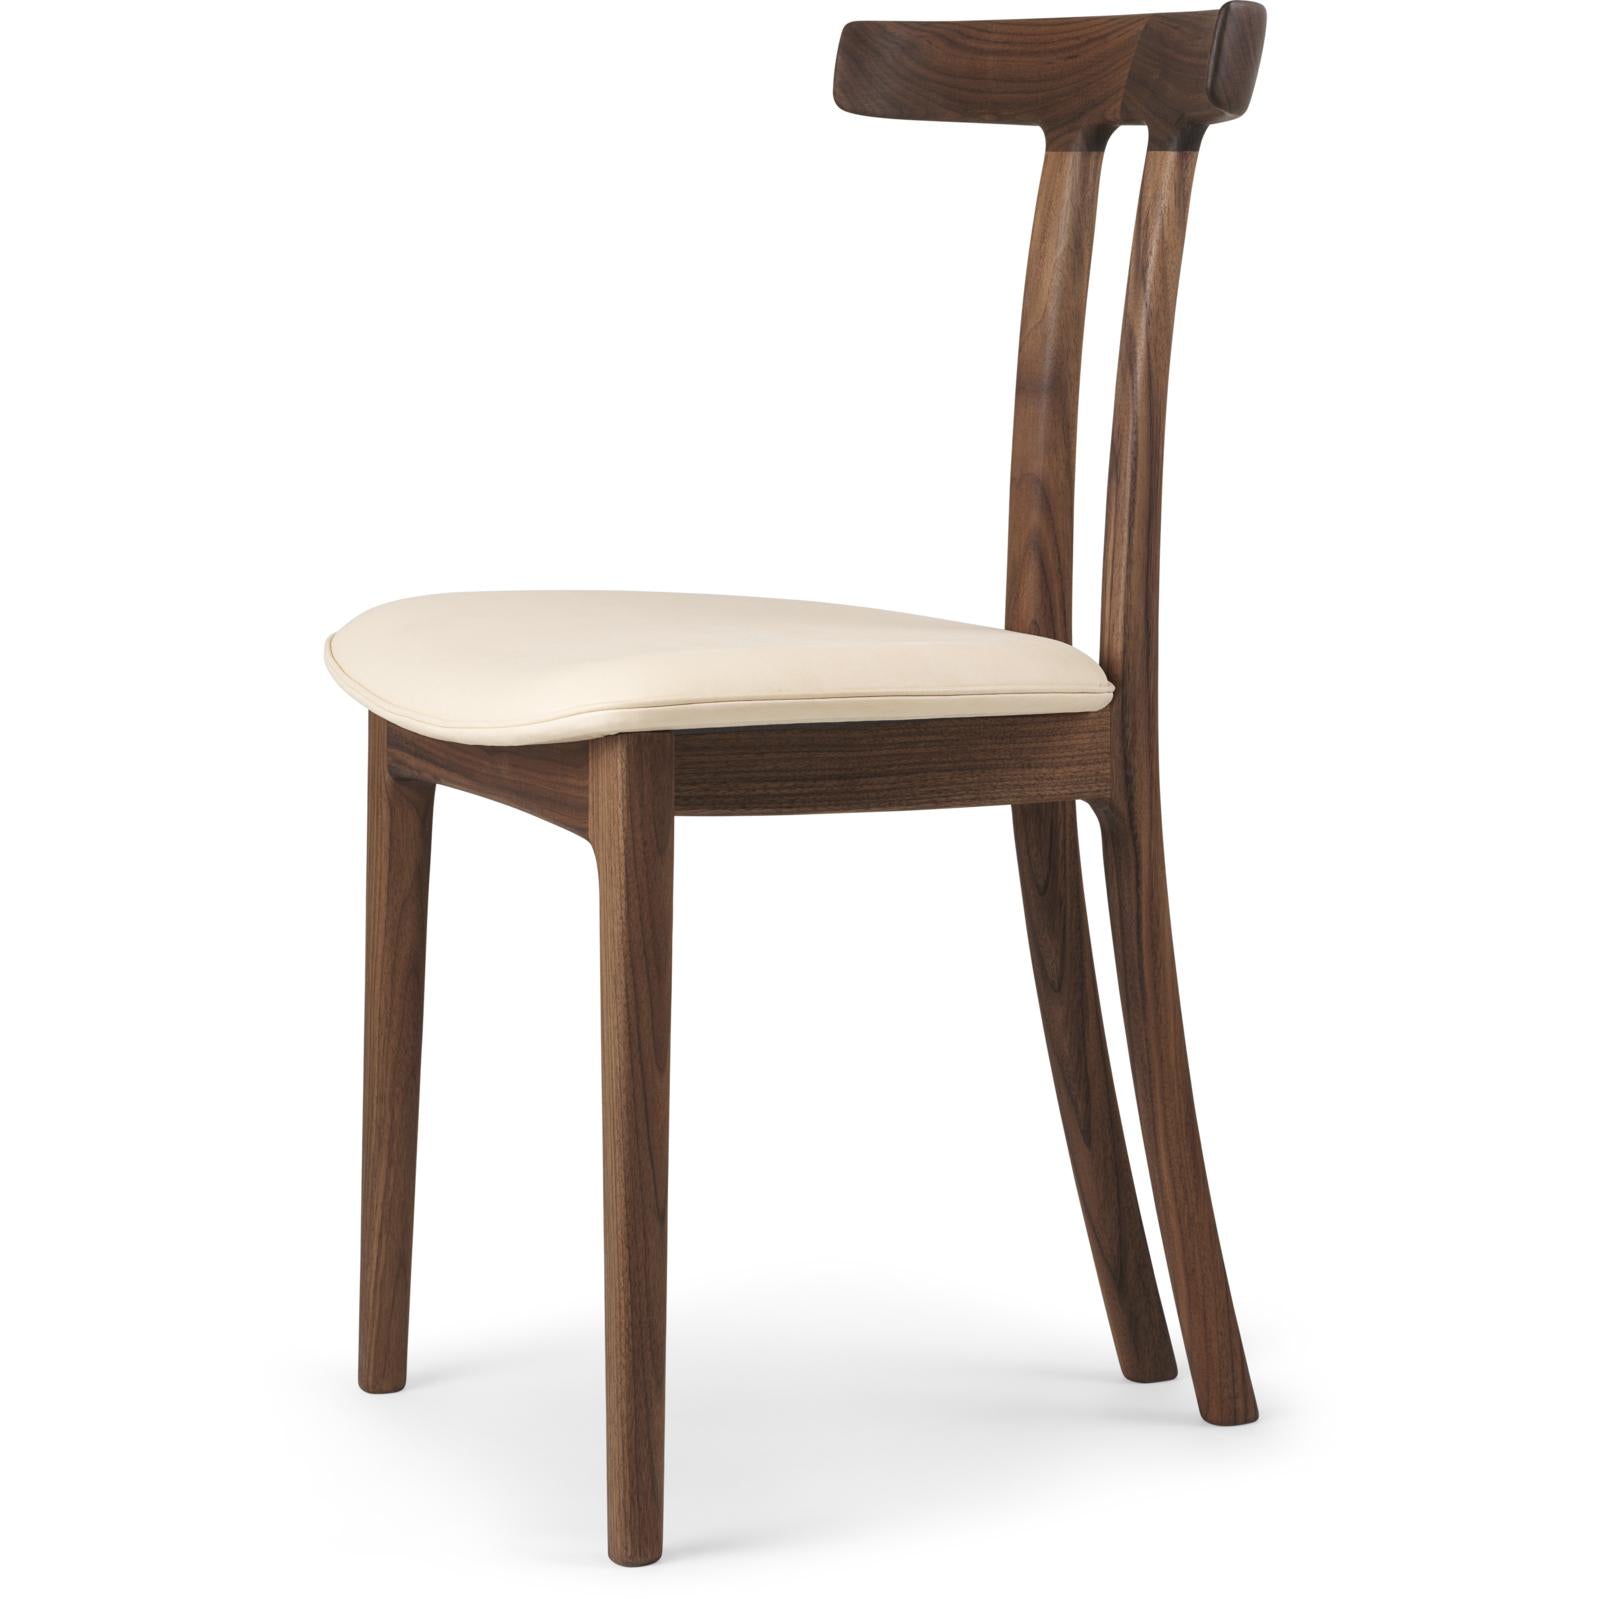 Carl Hansen Ow58 T Chair Walnut Oiled, Sif 90 Leather